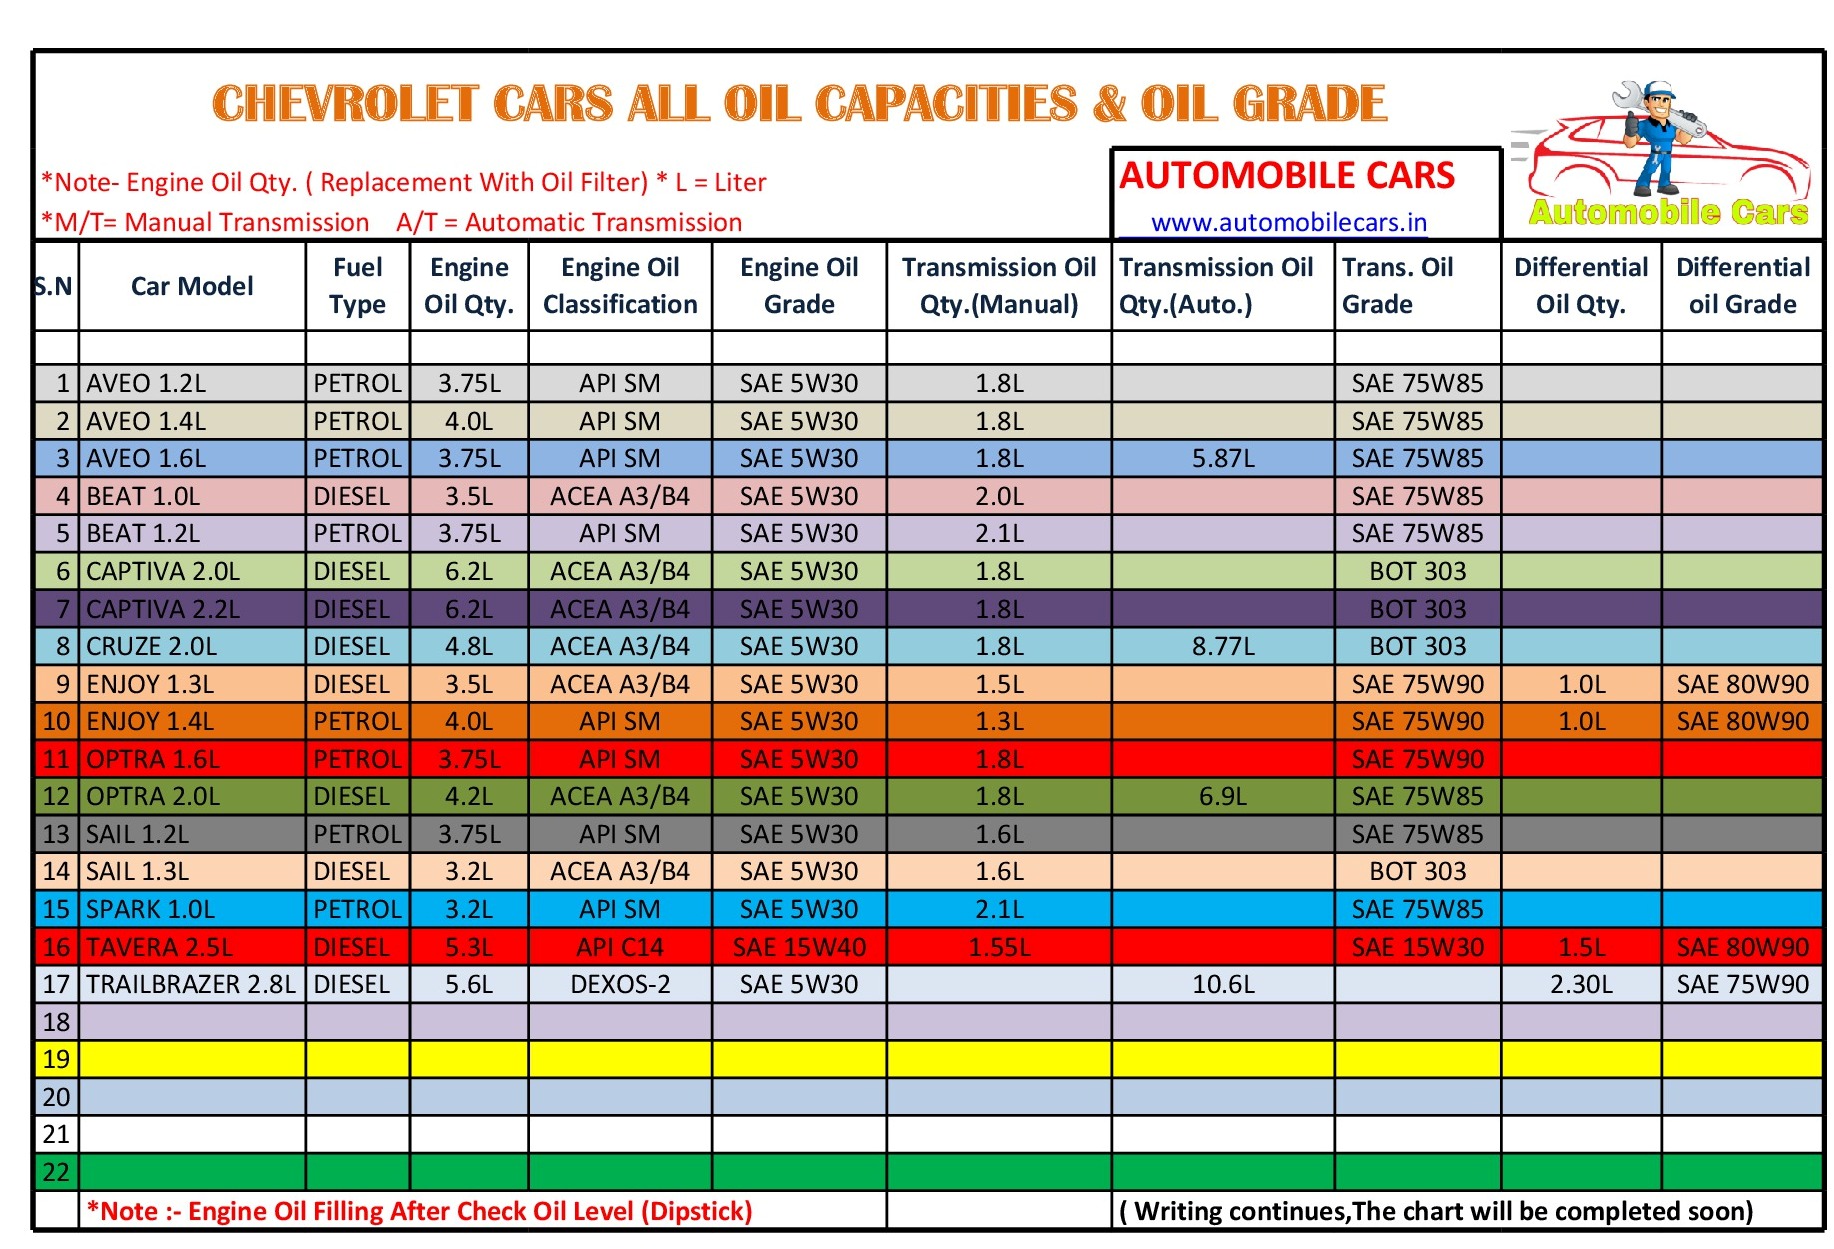 CHEVROLET CARS ENGINE OIL/GEAR OIL CAPACITY AND GRADES